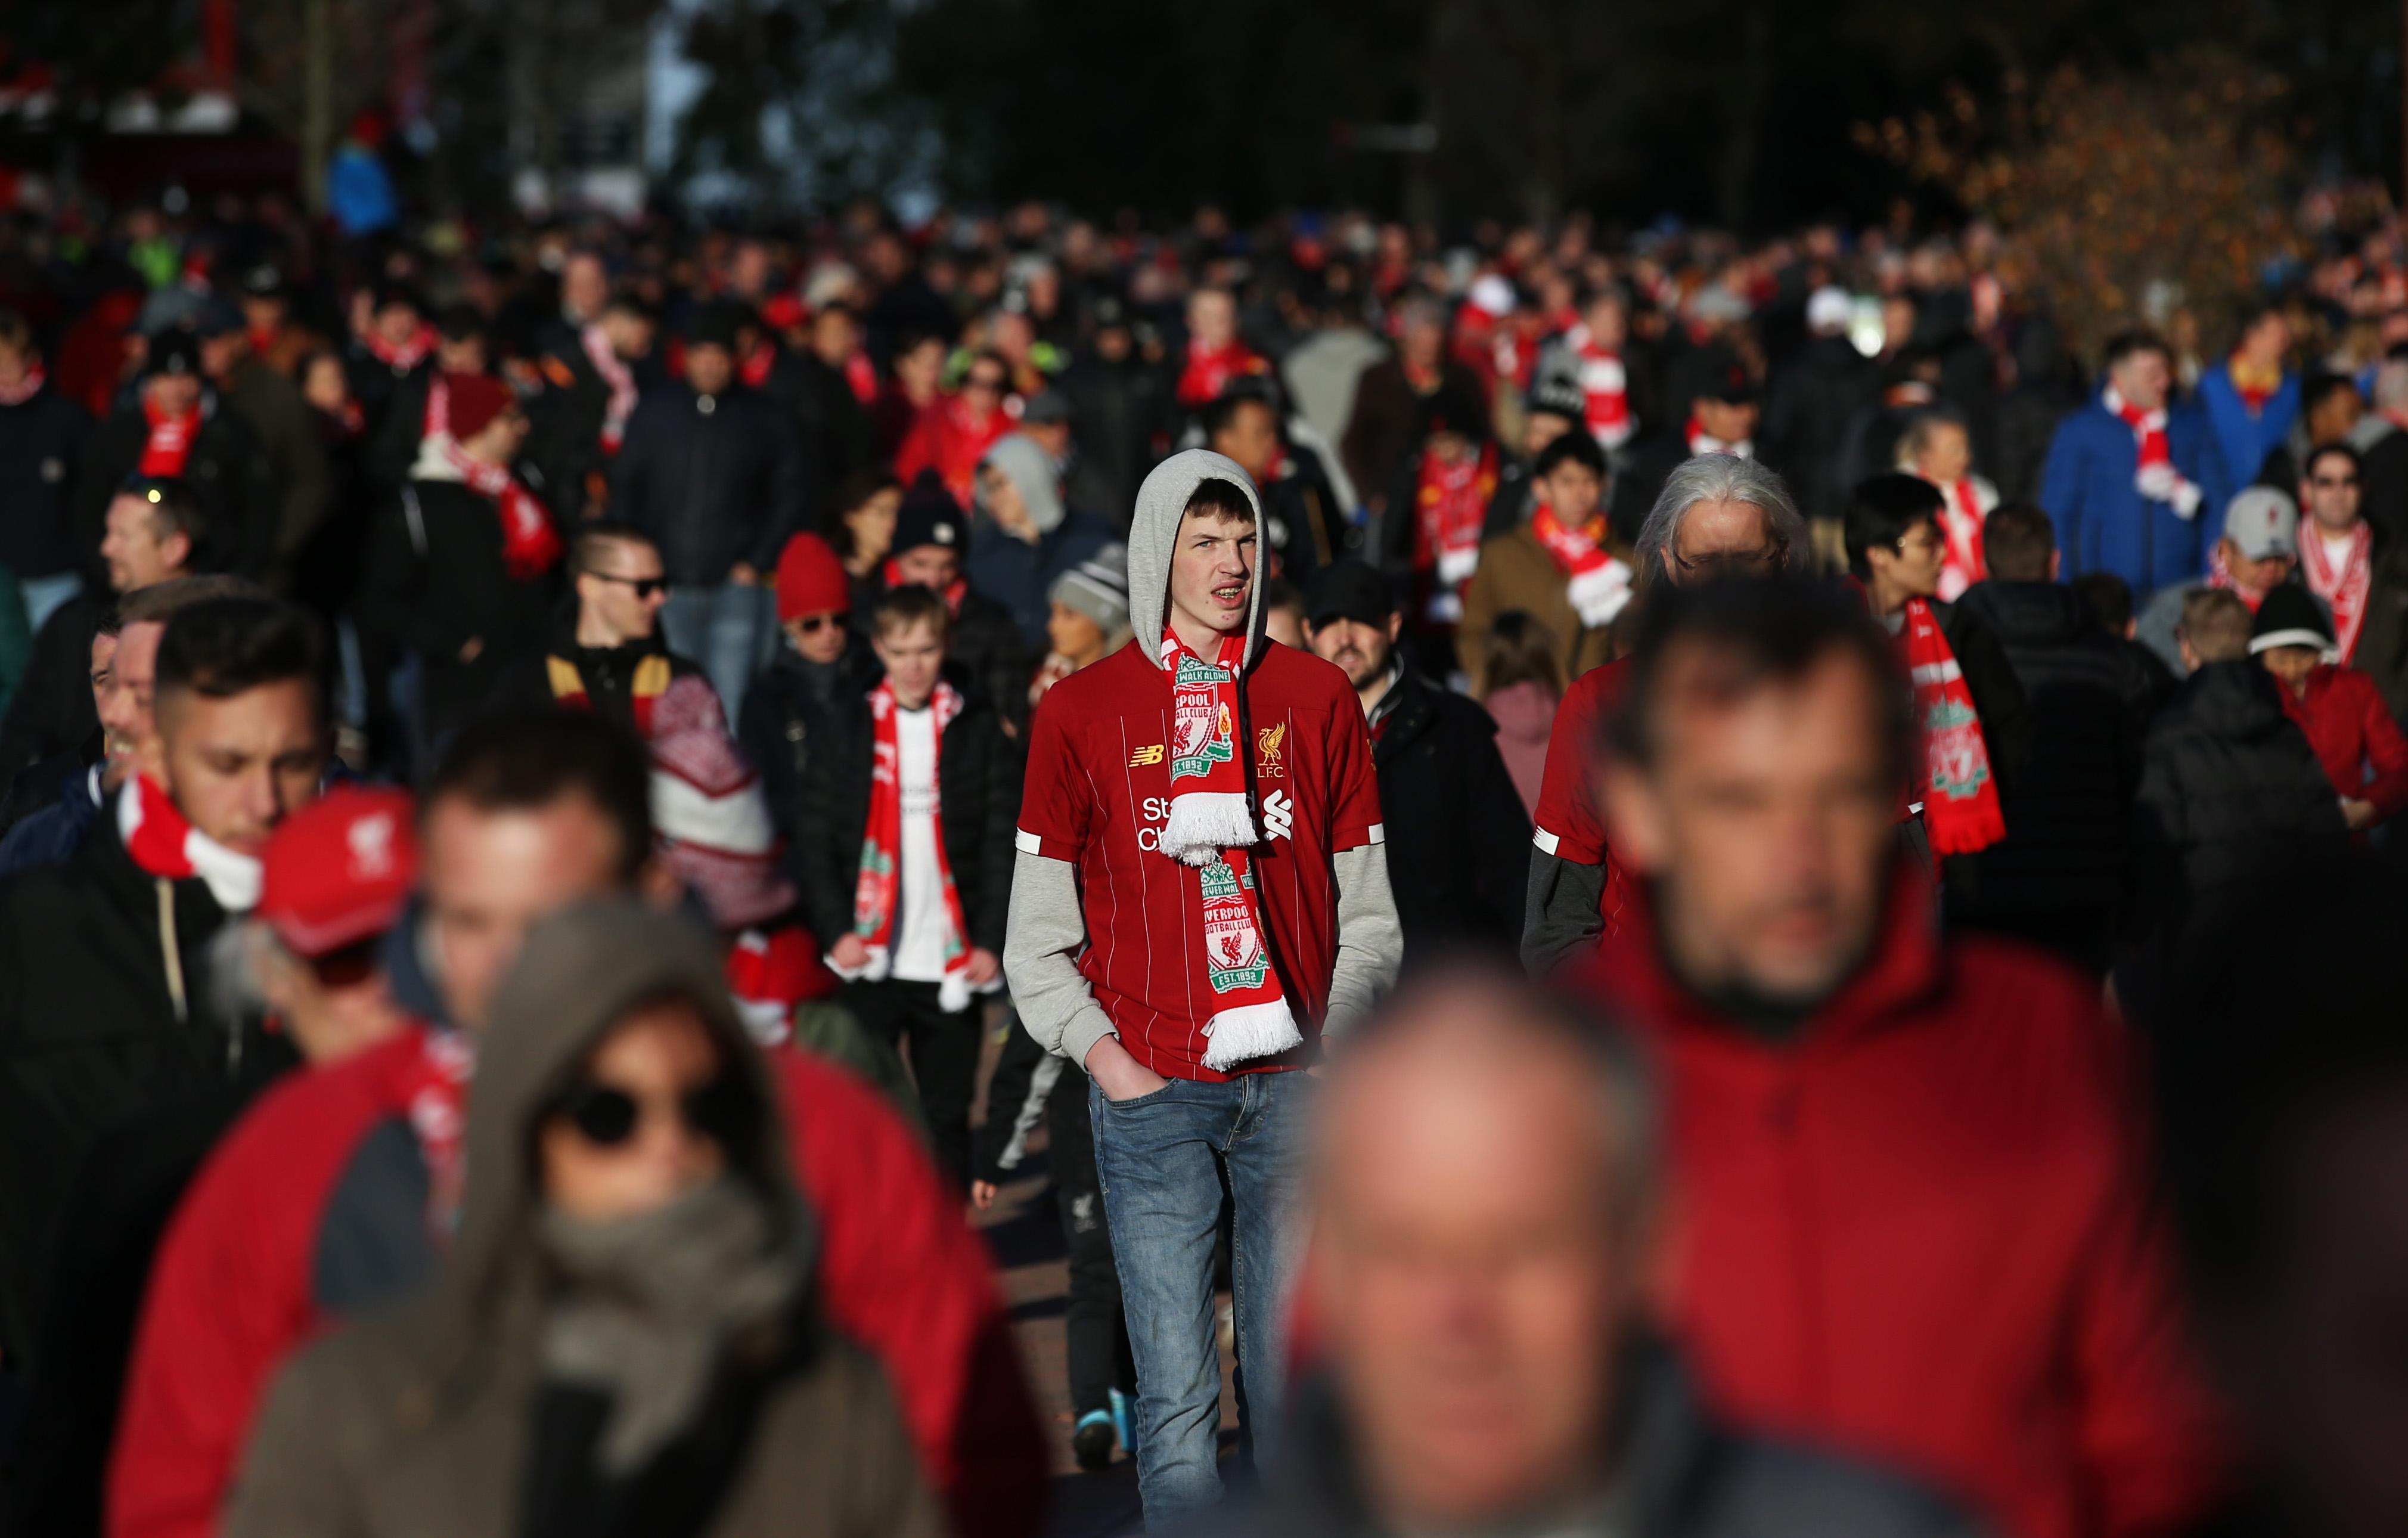 Fans walk to the stadium prior to the Premier League match between Liverpool FC and Tottenham Hotspur at Anfield on October 27, 2019 in Liverpool, United Kingdom.